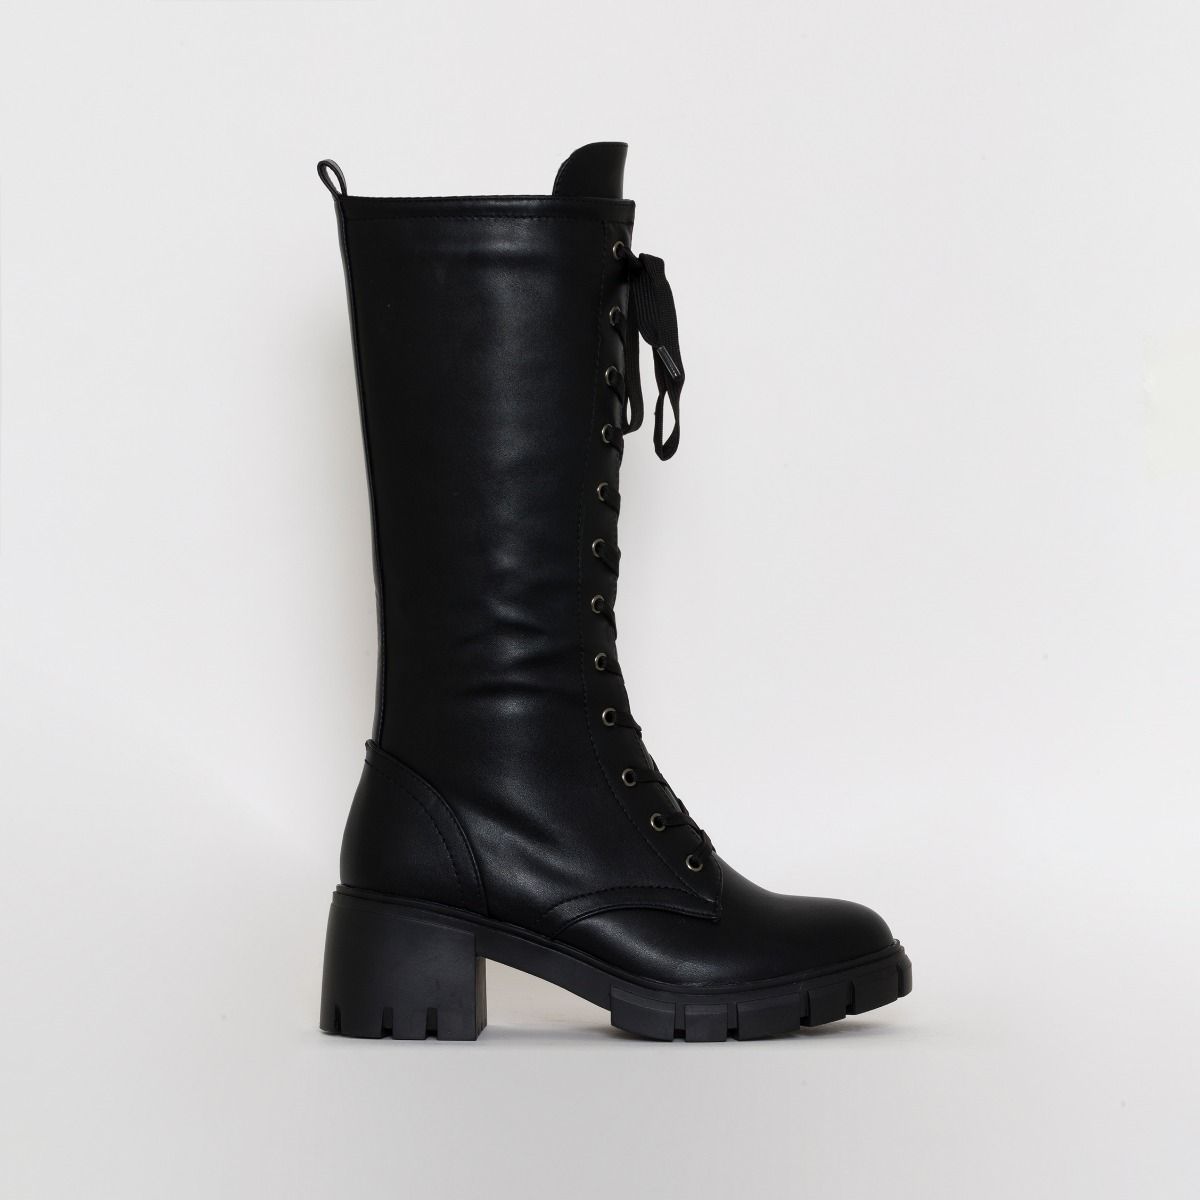 black mid high boots